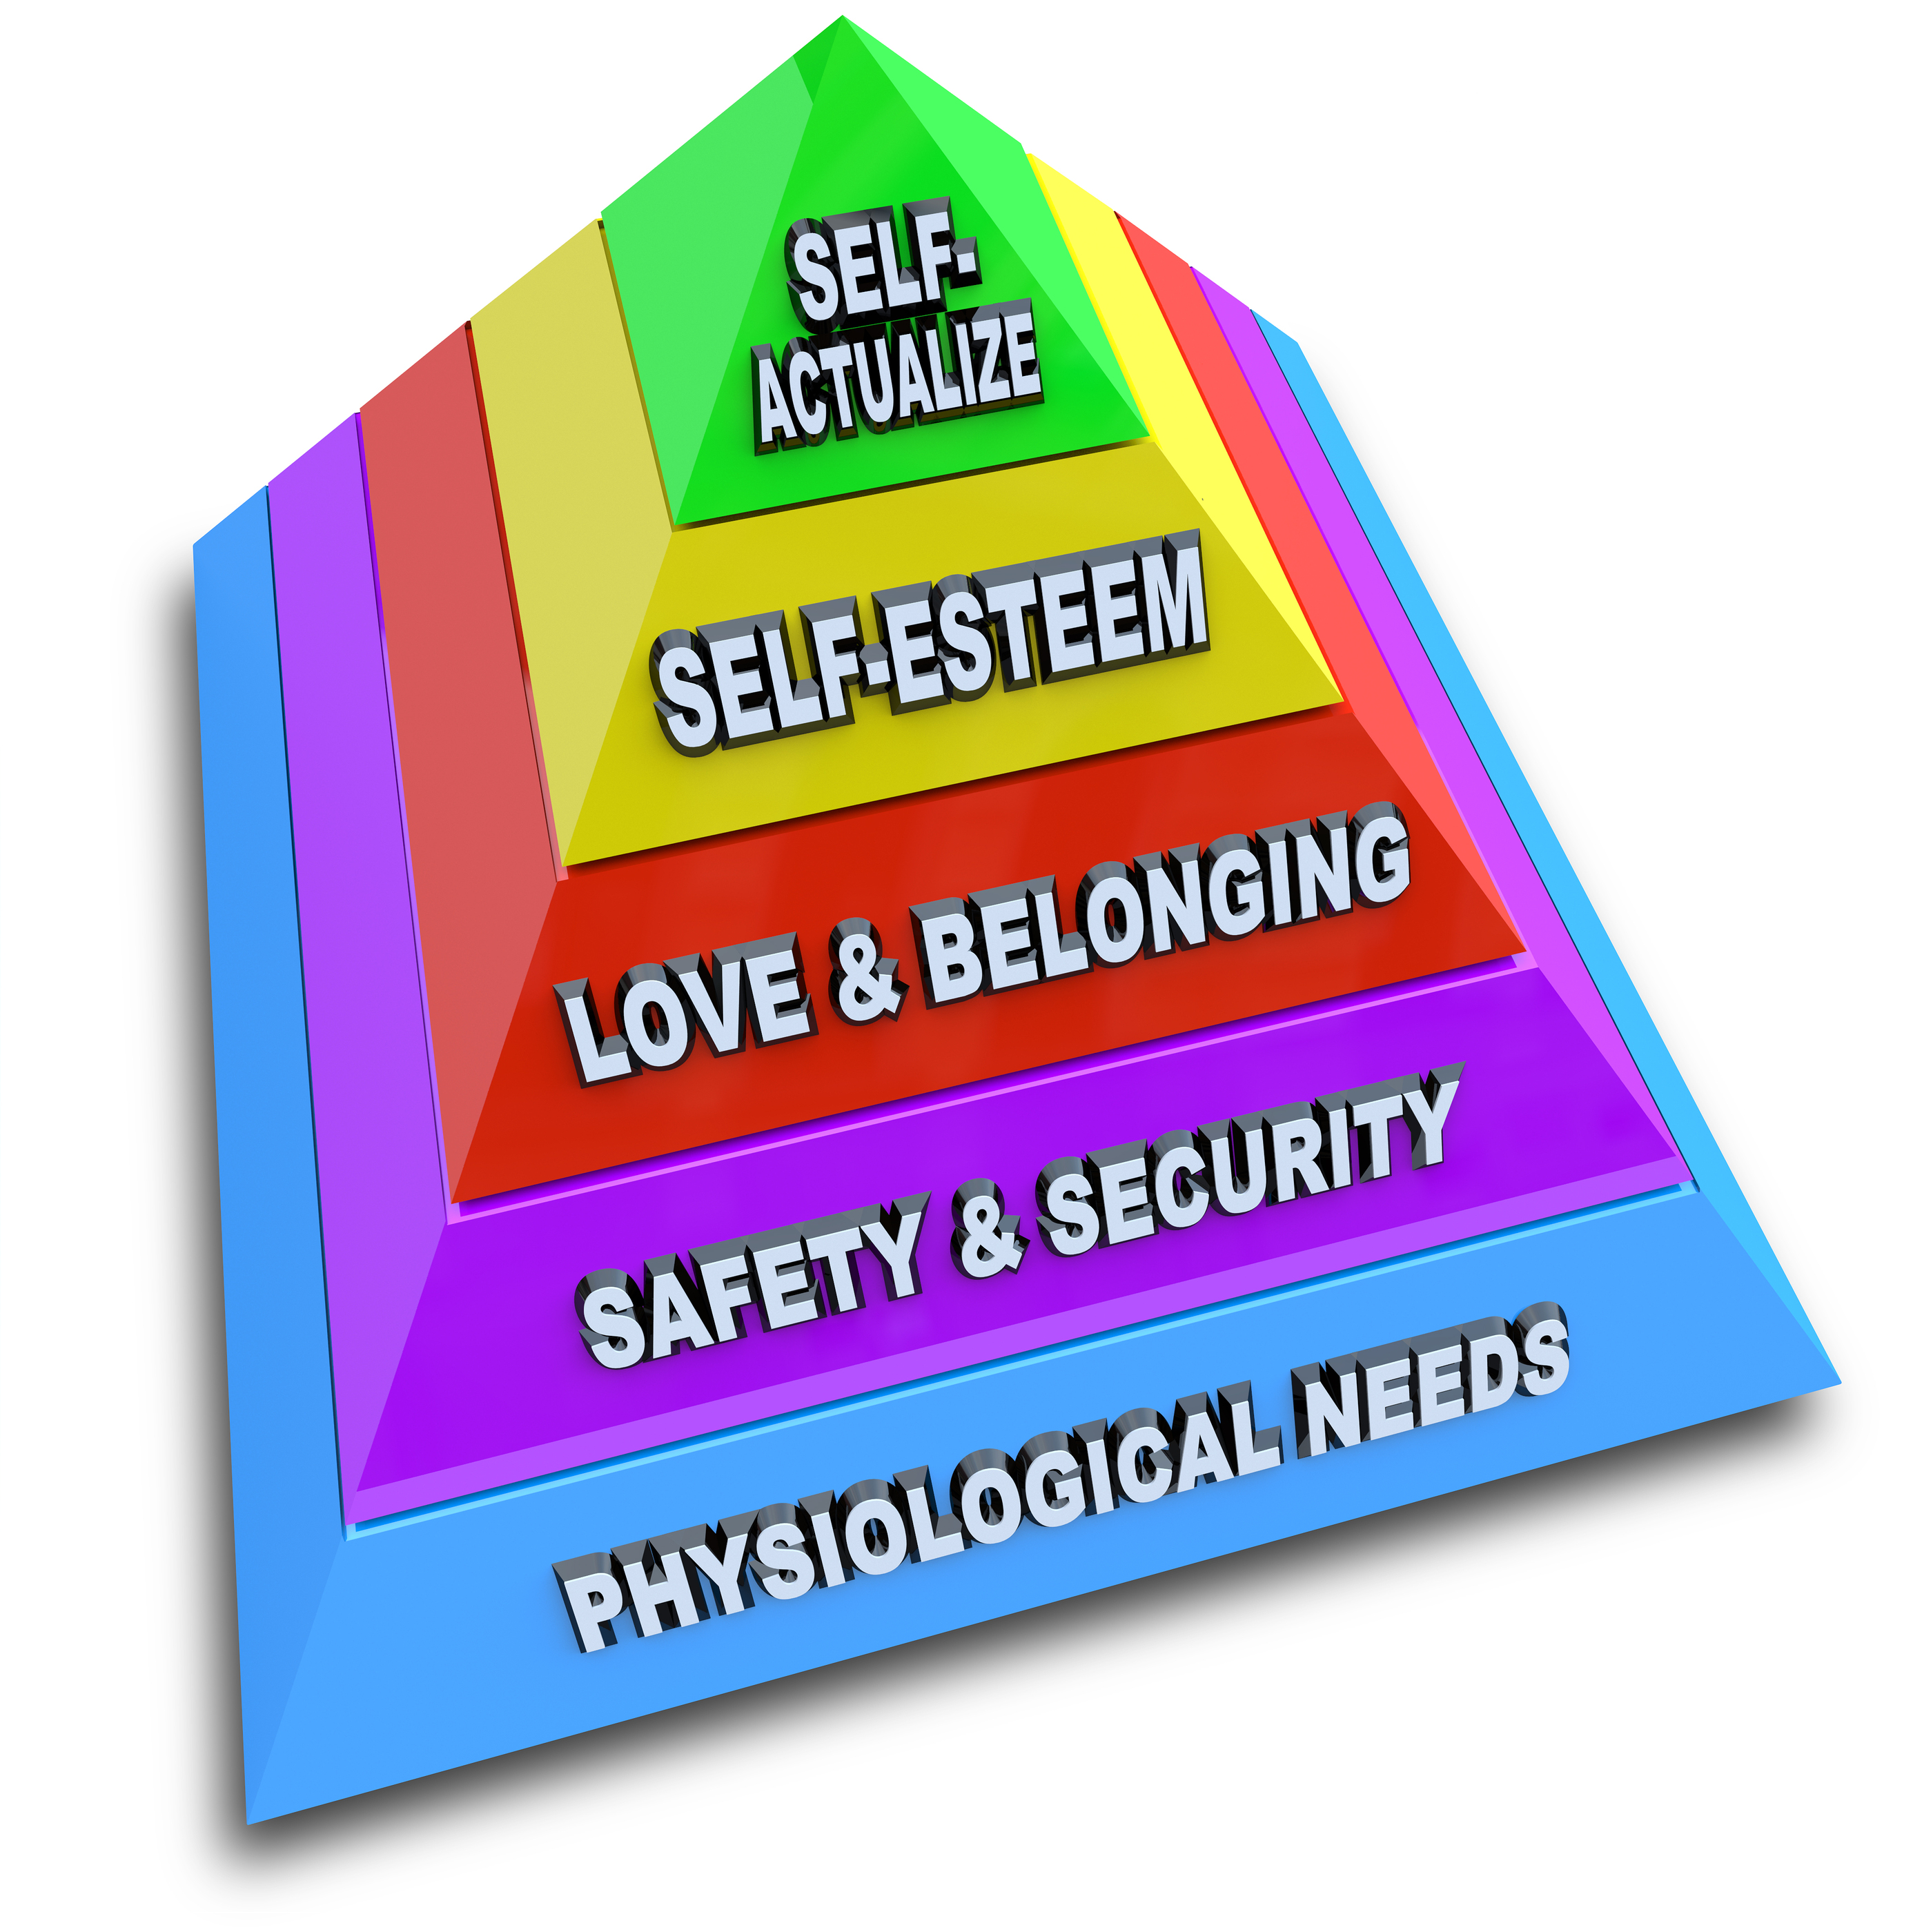 Maslow and a sustainable workplace